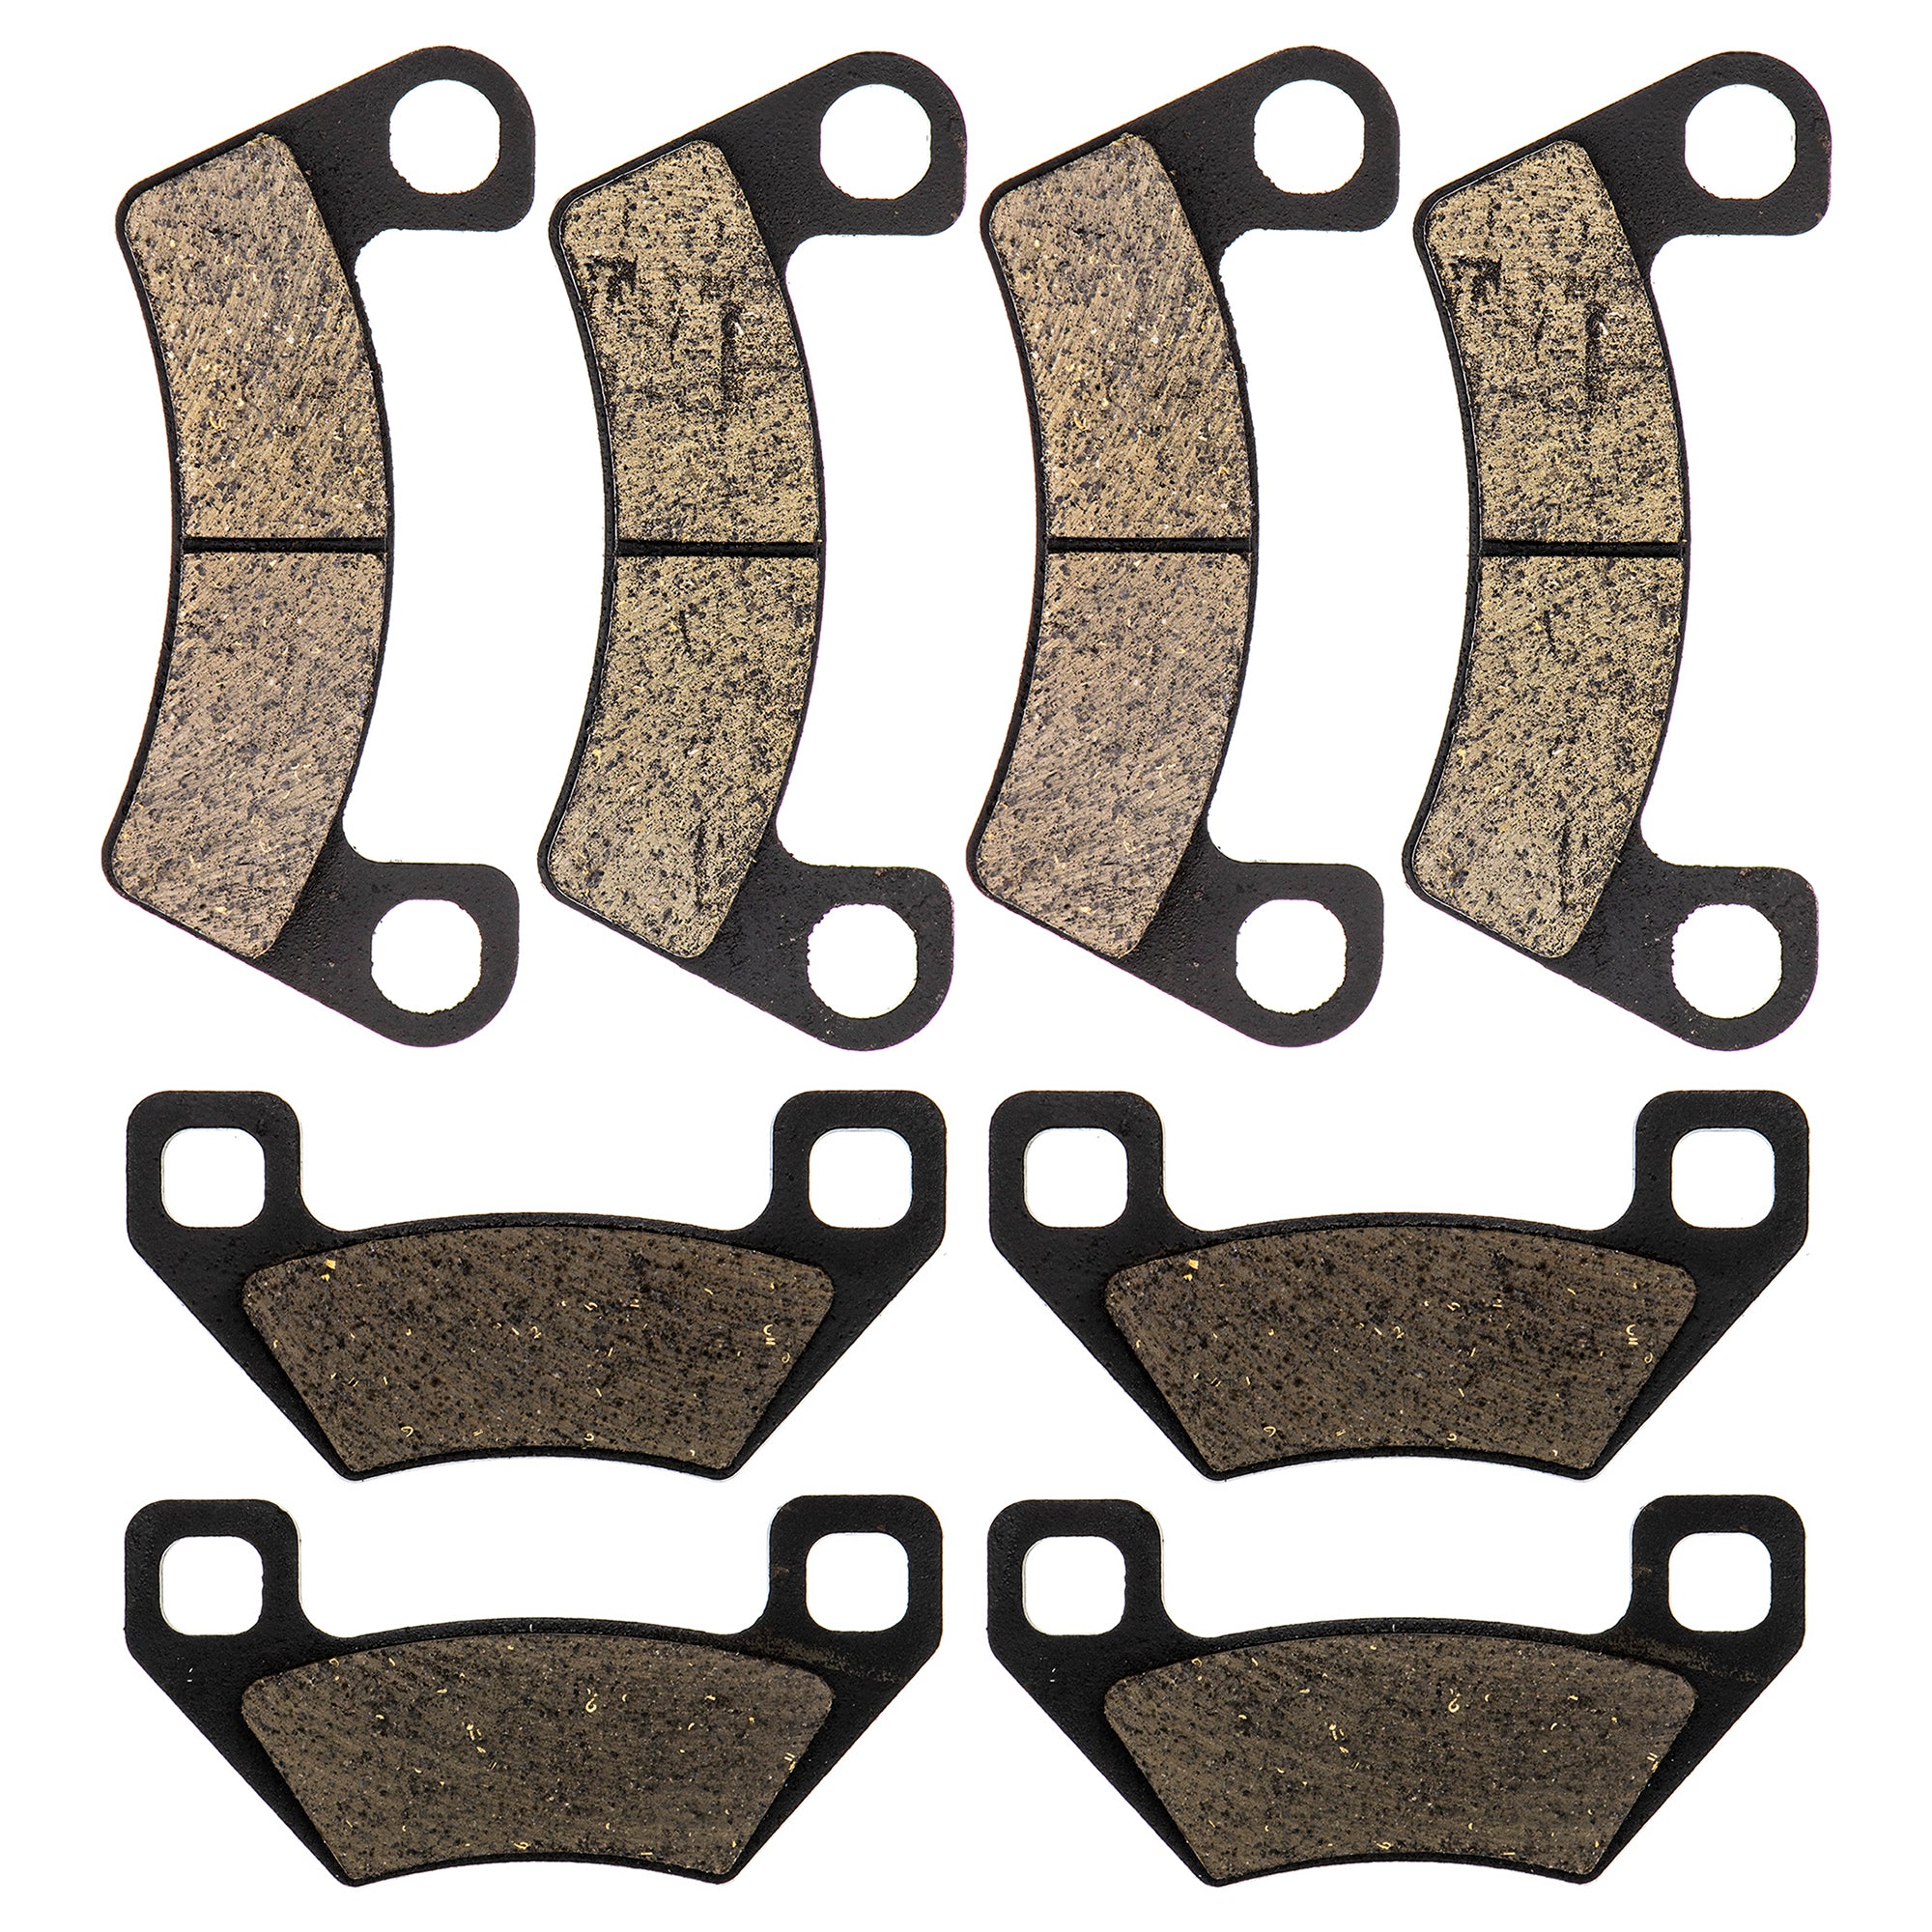 Brake Pad Kit Front/Rear for Arctic Cat Textron Cat 1436-811 2502-217 NICHE MK1002435